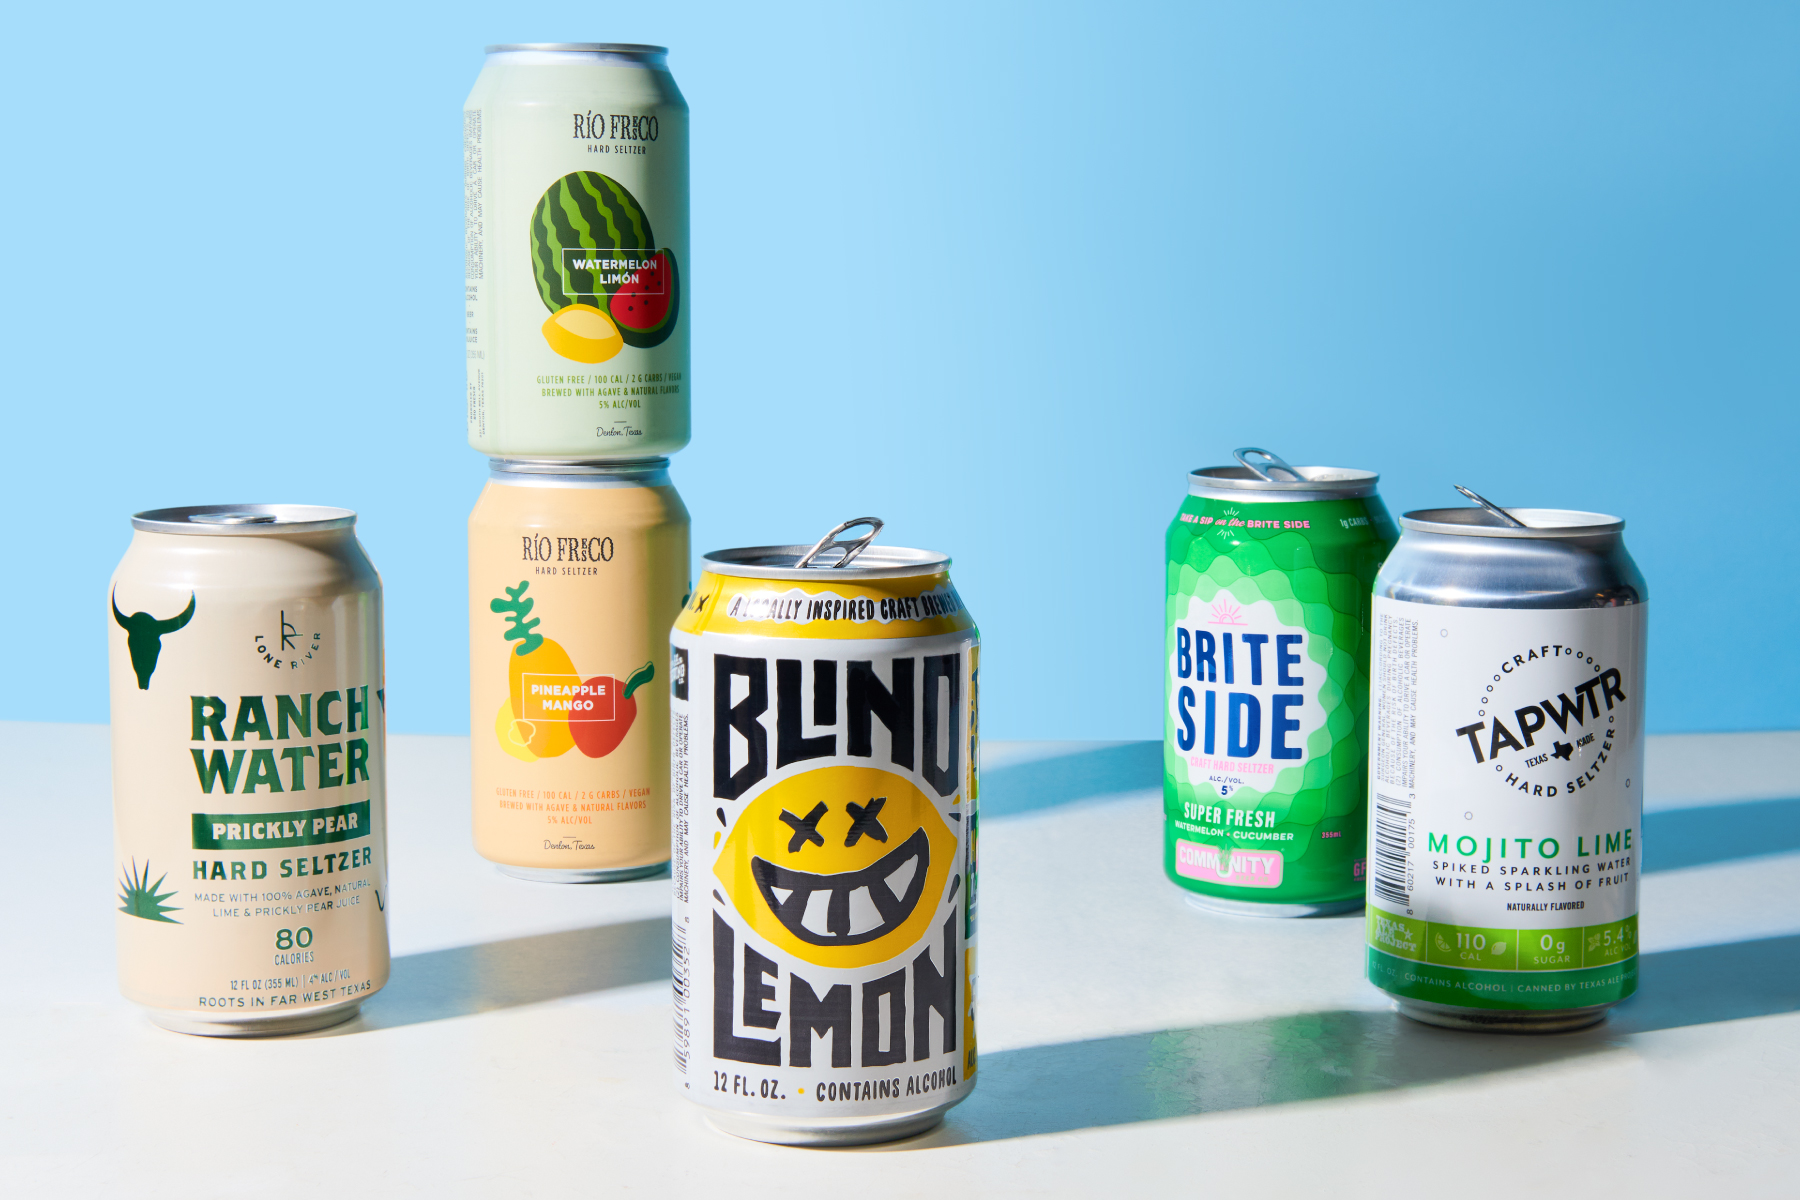 Hard Seltzer's Race to Differentiate